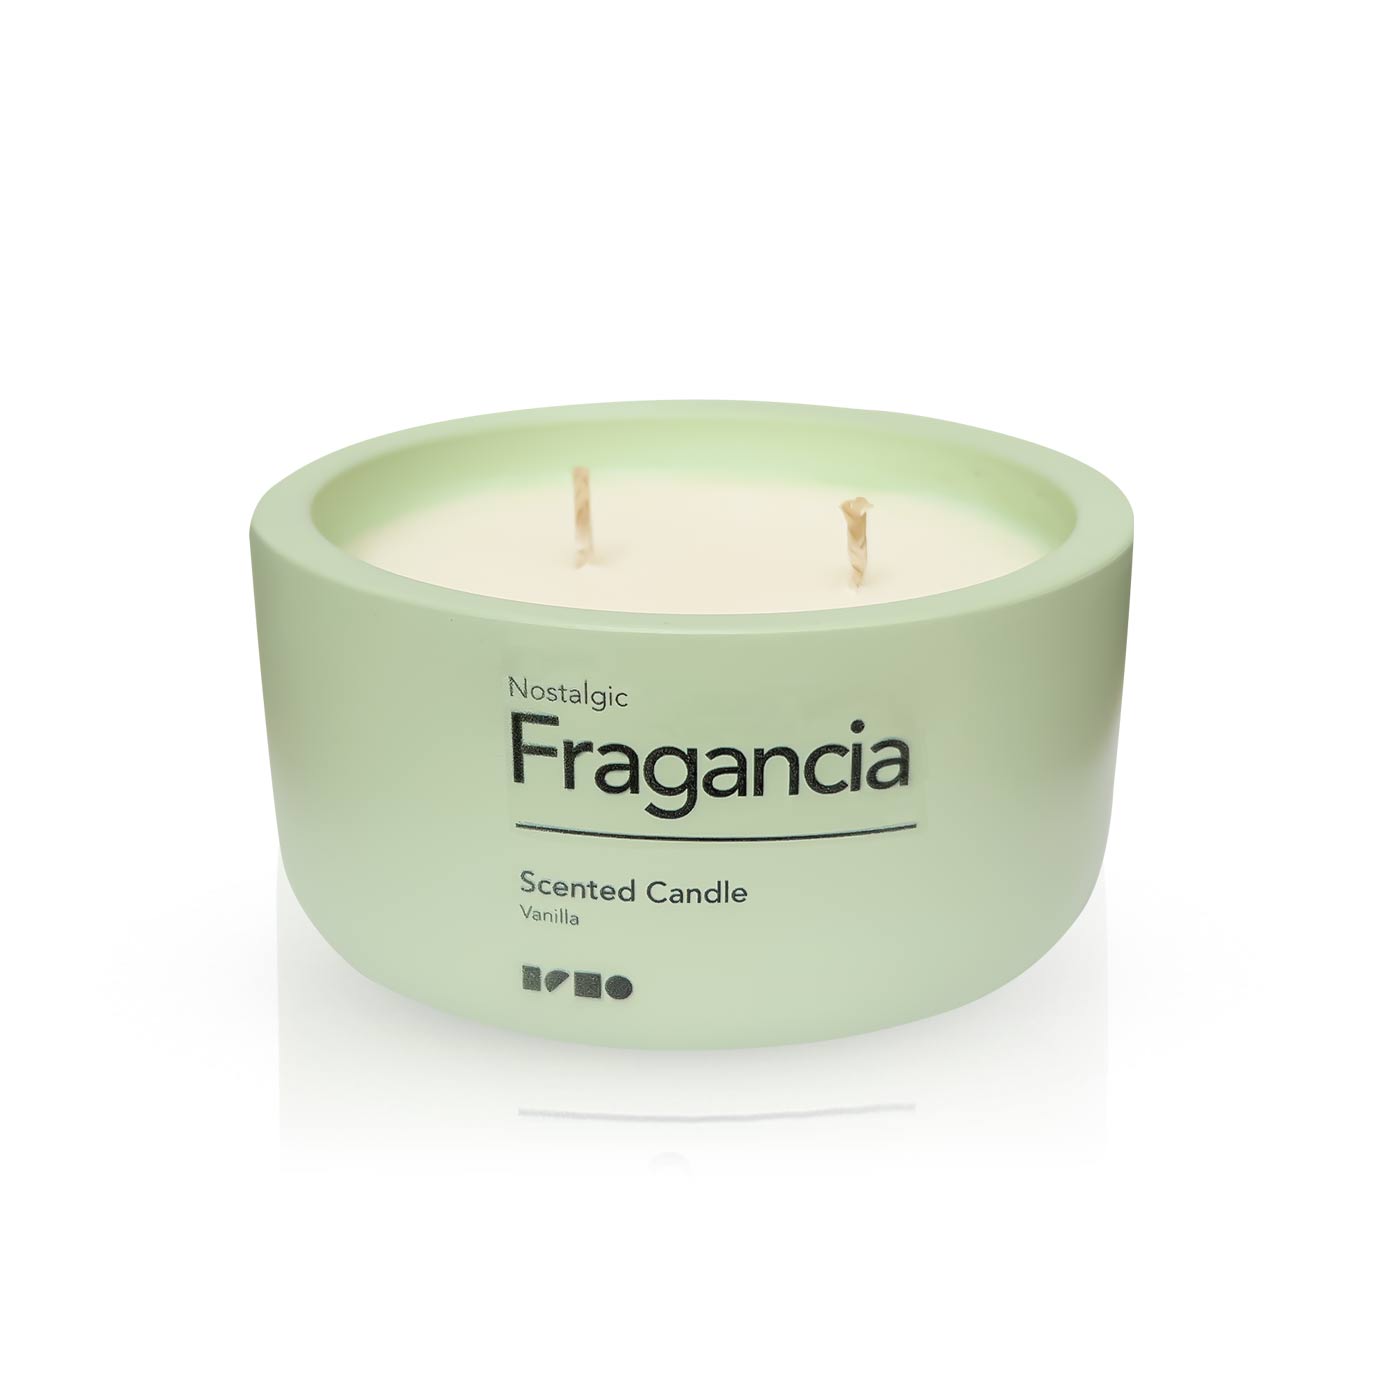 Fragancia Scented Candle